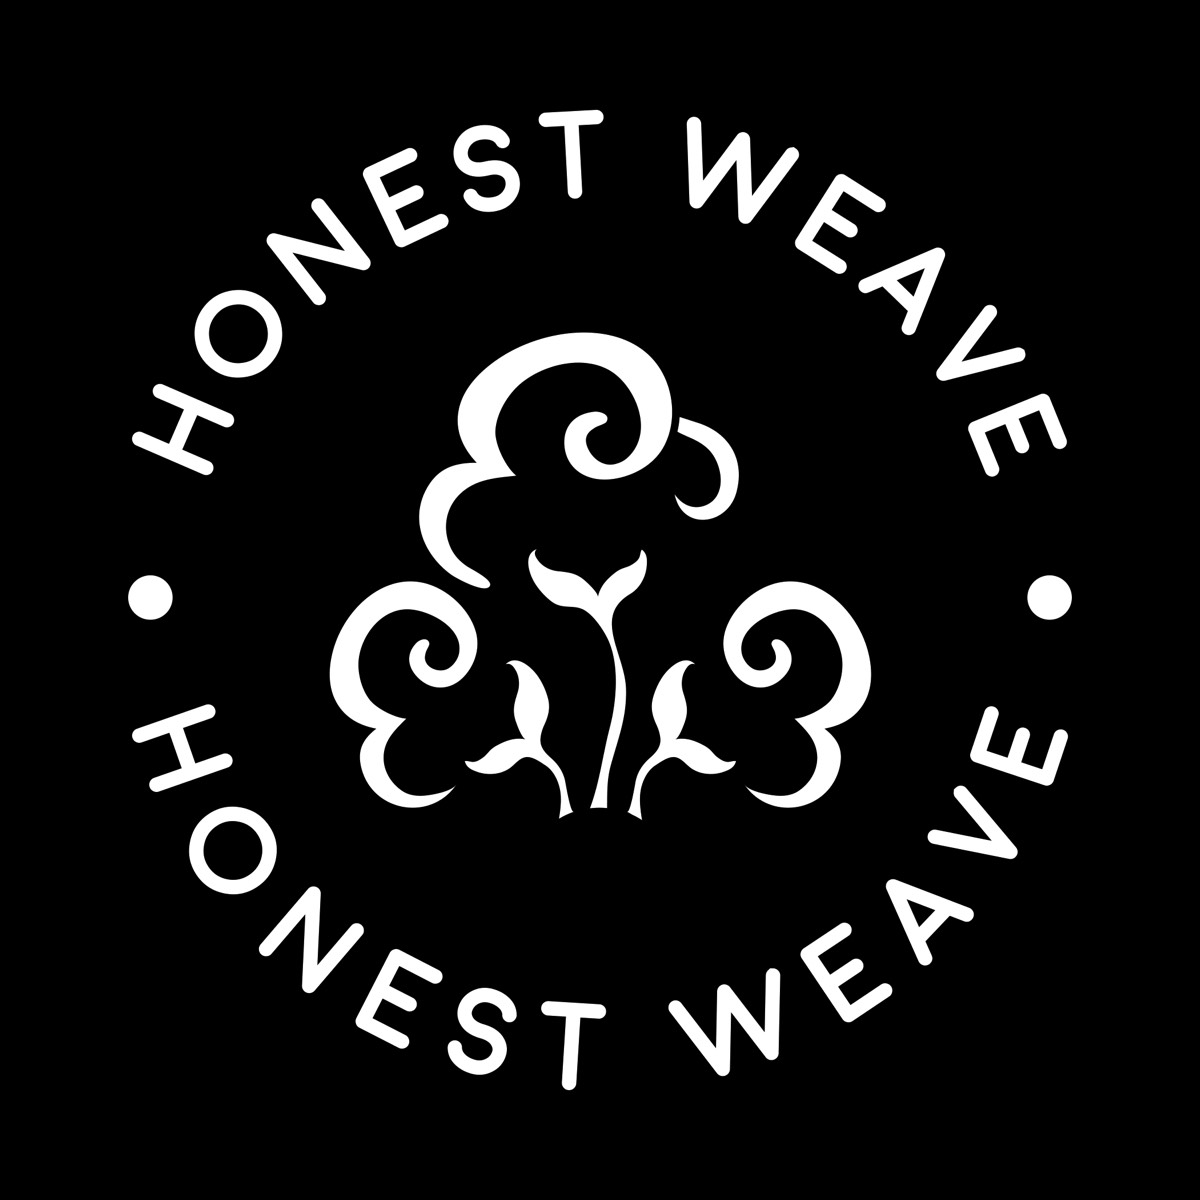 Honest Weave GOTS Certified Organic Cotton Kitchen Hand and Dish Towel Sets - Oversized 20x30 Inches, Fully Hemmed, in Designer Colors, 6-Pack, Black